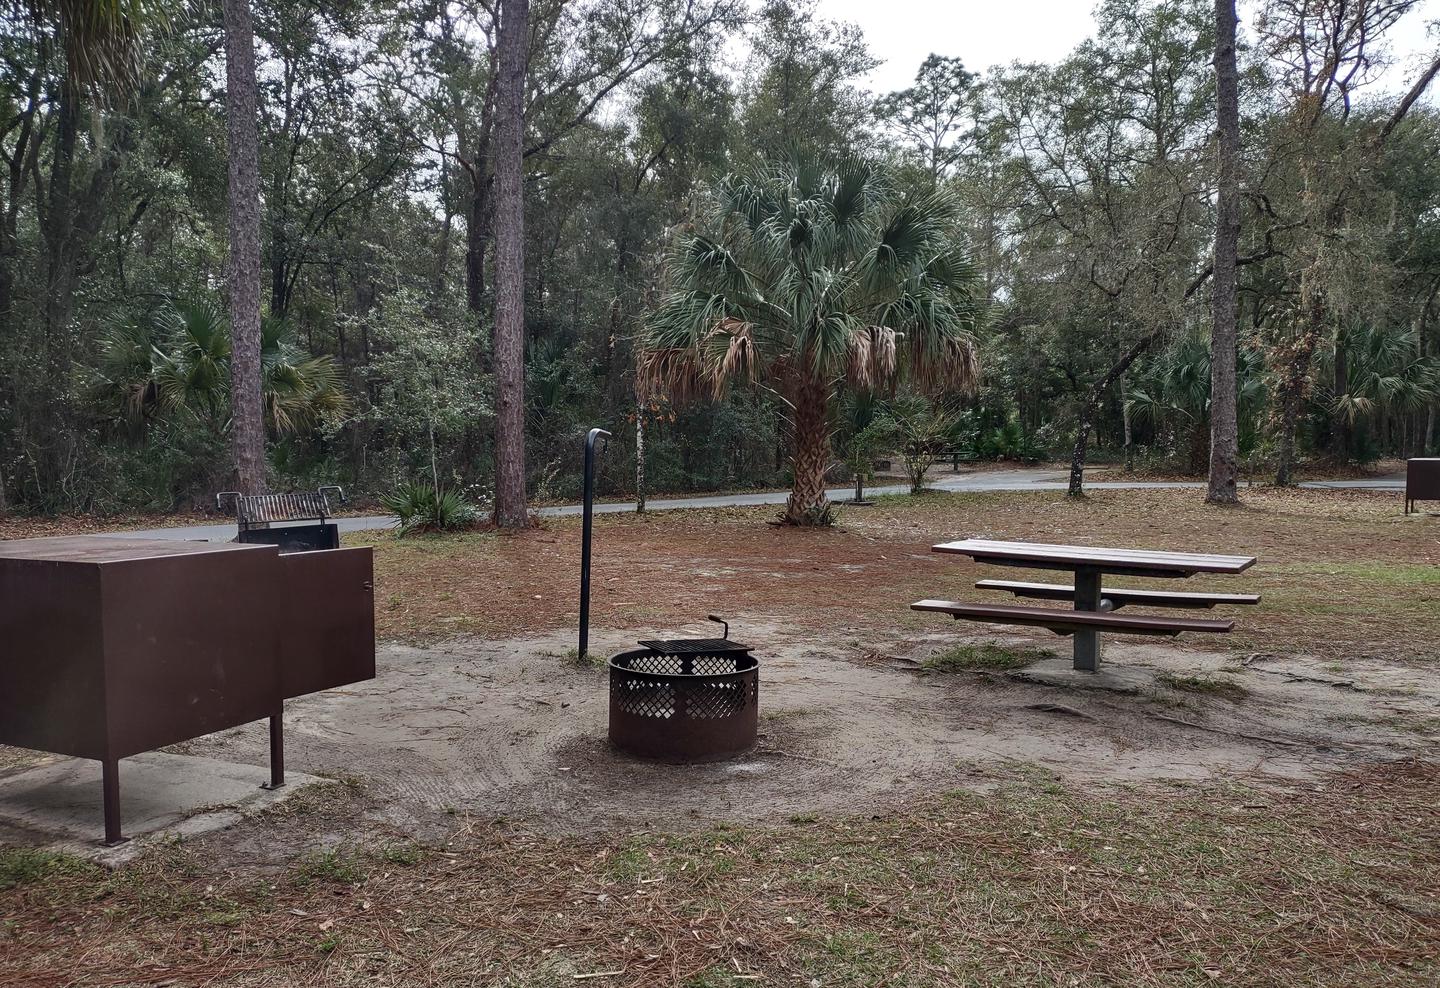 Another view of site 65Amenities: fire ring, picnic table, light pole, grill, bear-proof storage locker